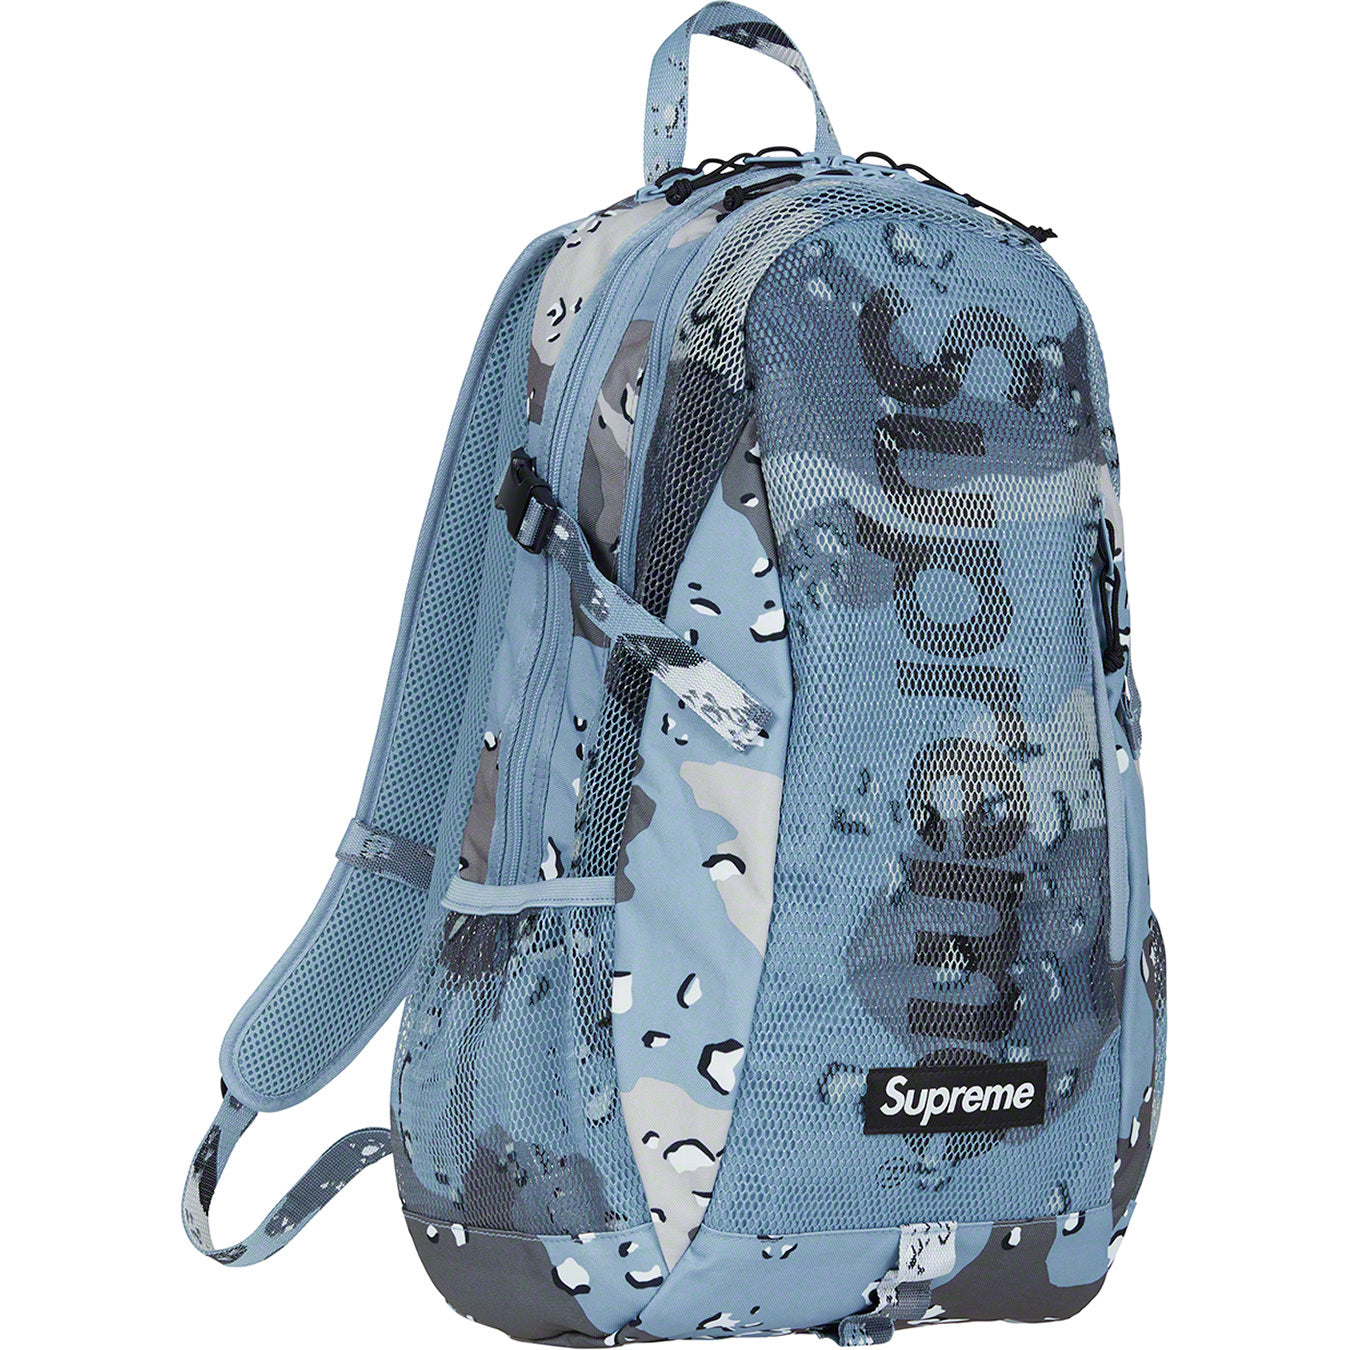 Supreme 2020ss Backpack Blue Camo - リュック/バックパック